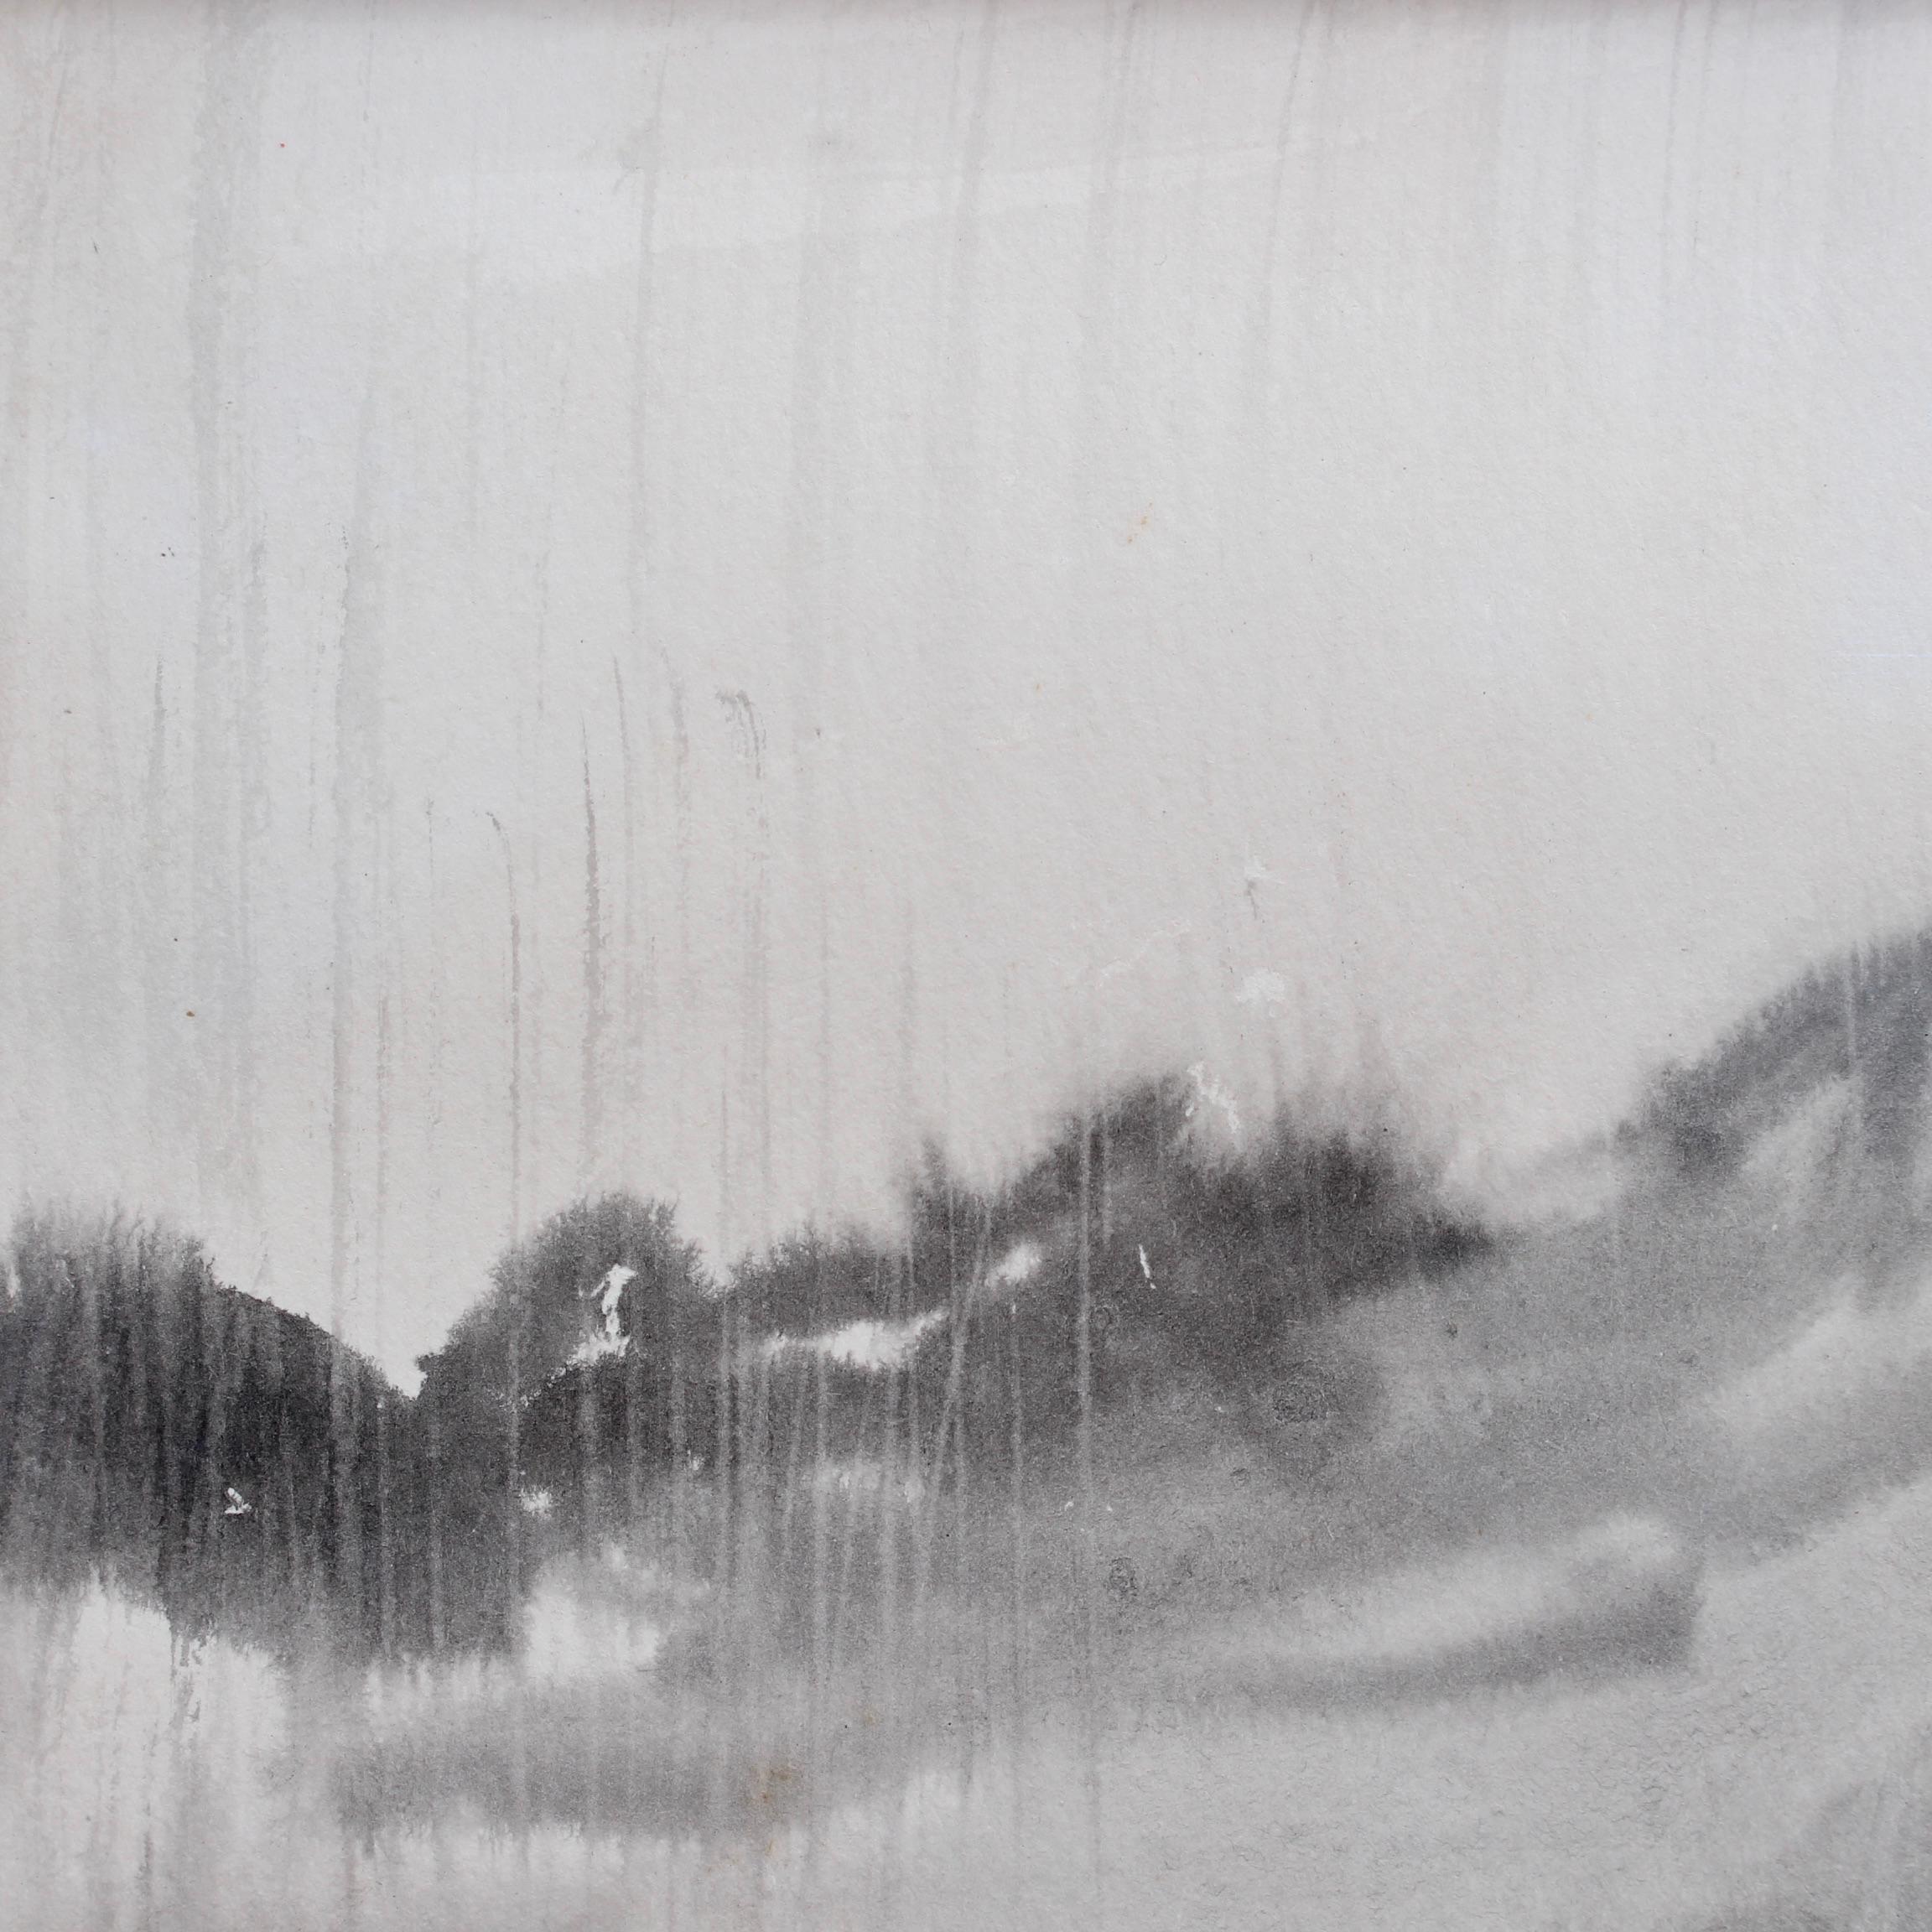 'Raining in Formosa on the Tamsui River' by Ran In-Ting (Lan Yinding, 藍蔭鼎) For Sale 1